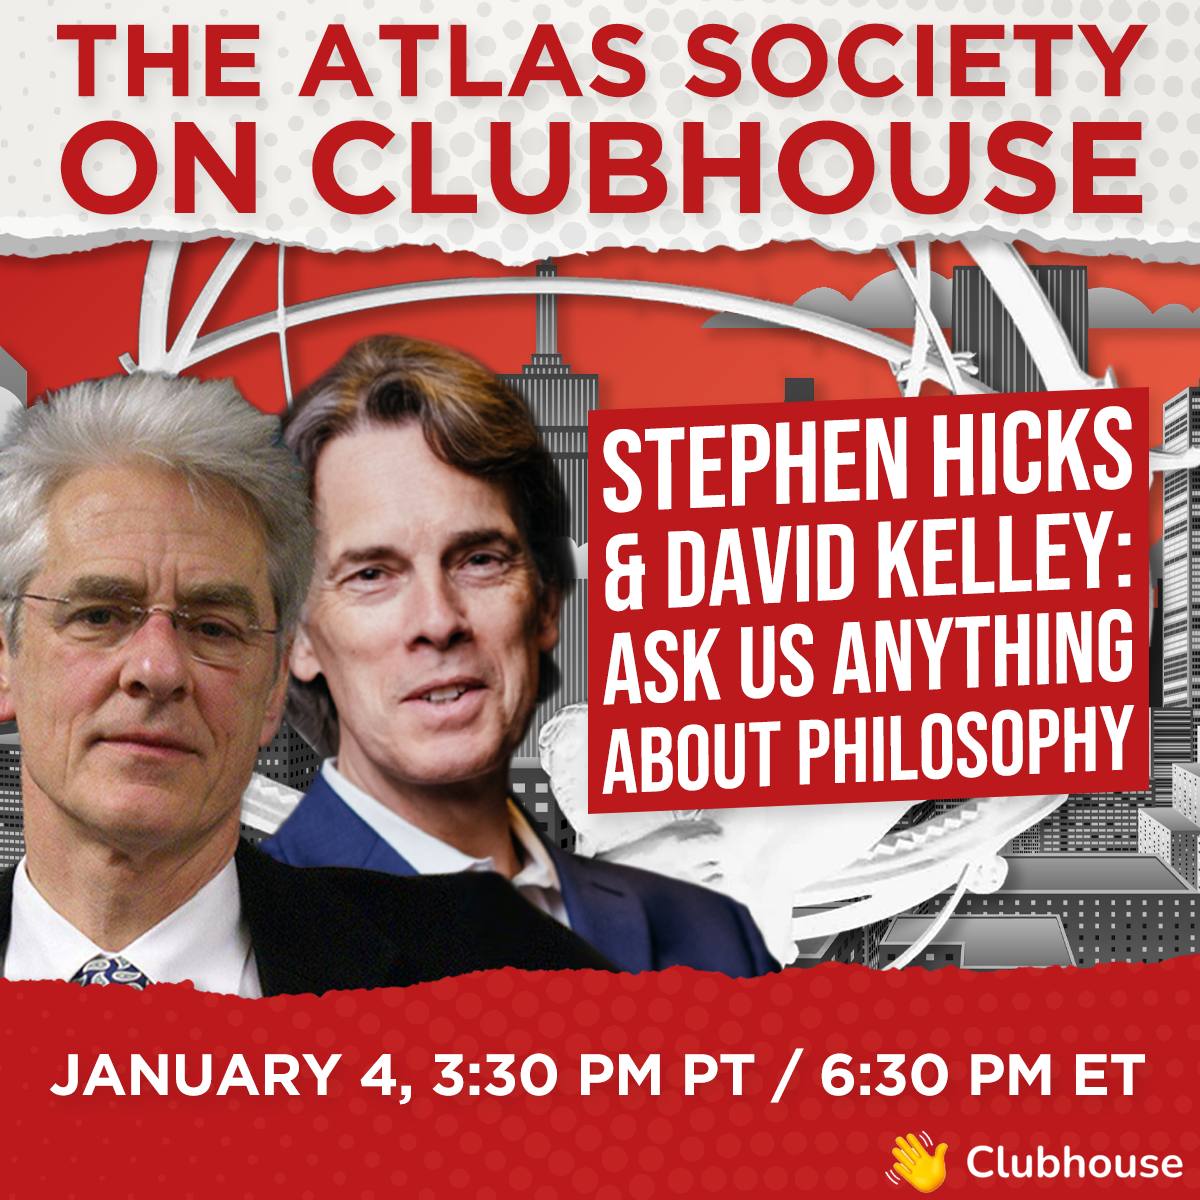 Stephen Hicks & David Kelley - Ask Us Anything About Philosophy - January 2023